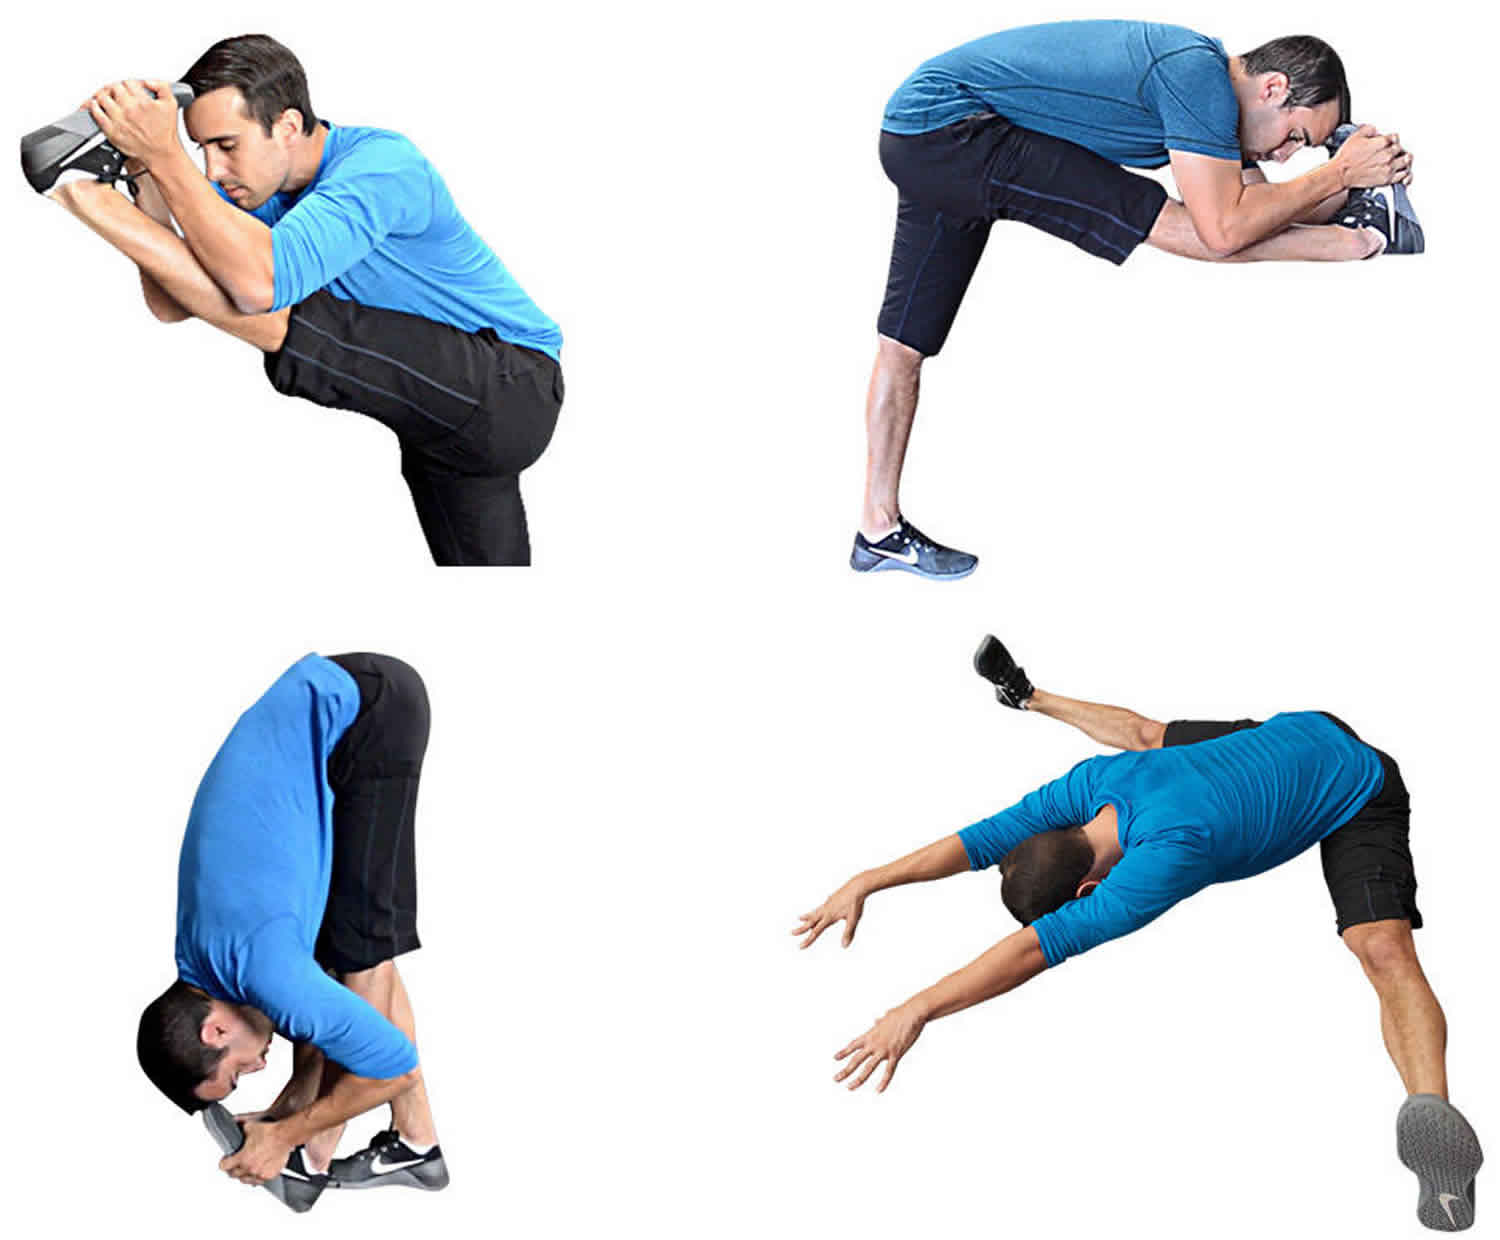 Types Of Stretching Exercise With Pictures | vlr.eng.br